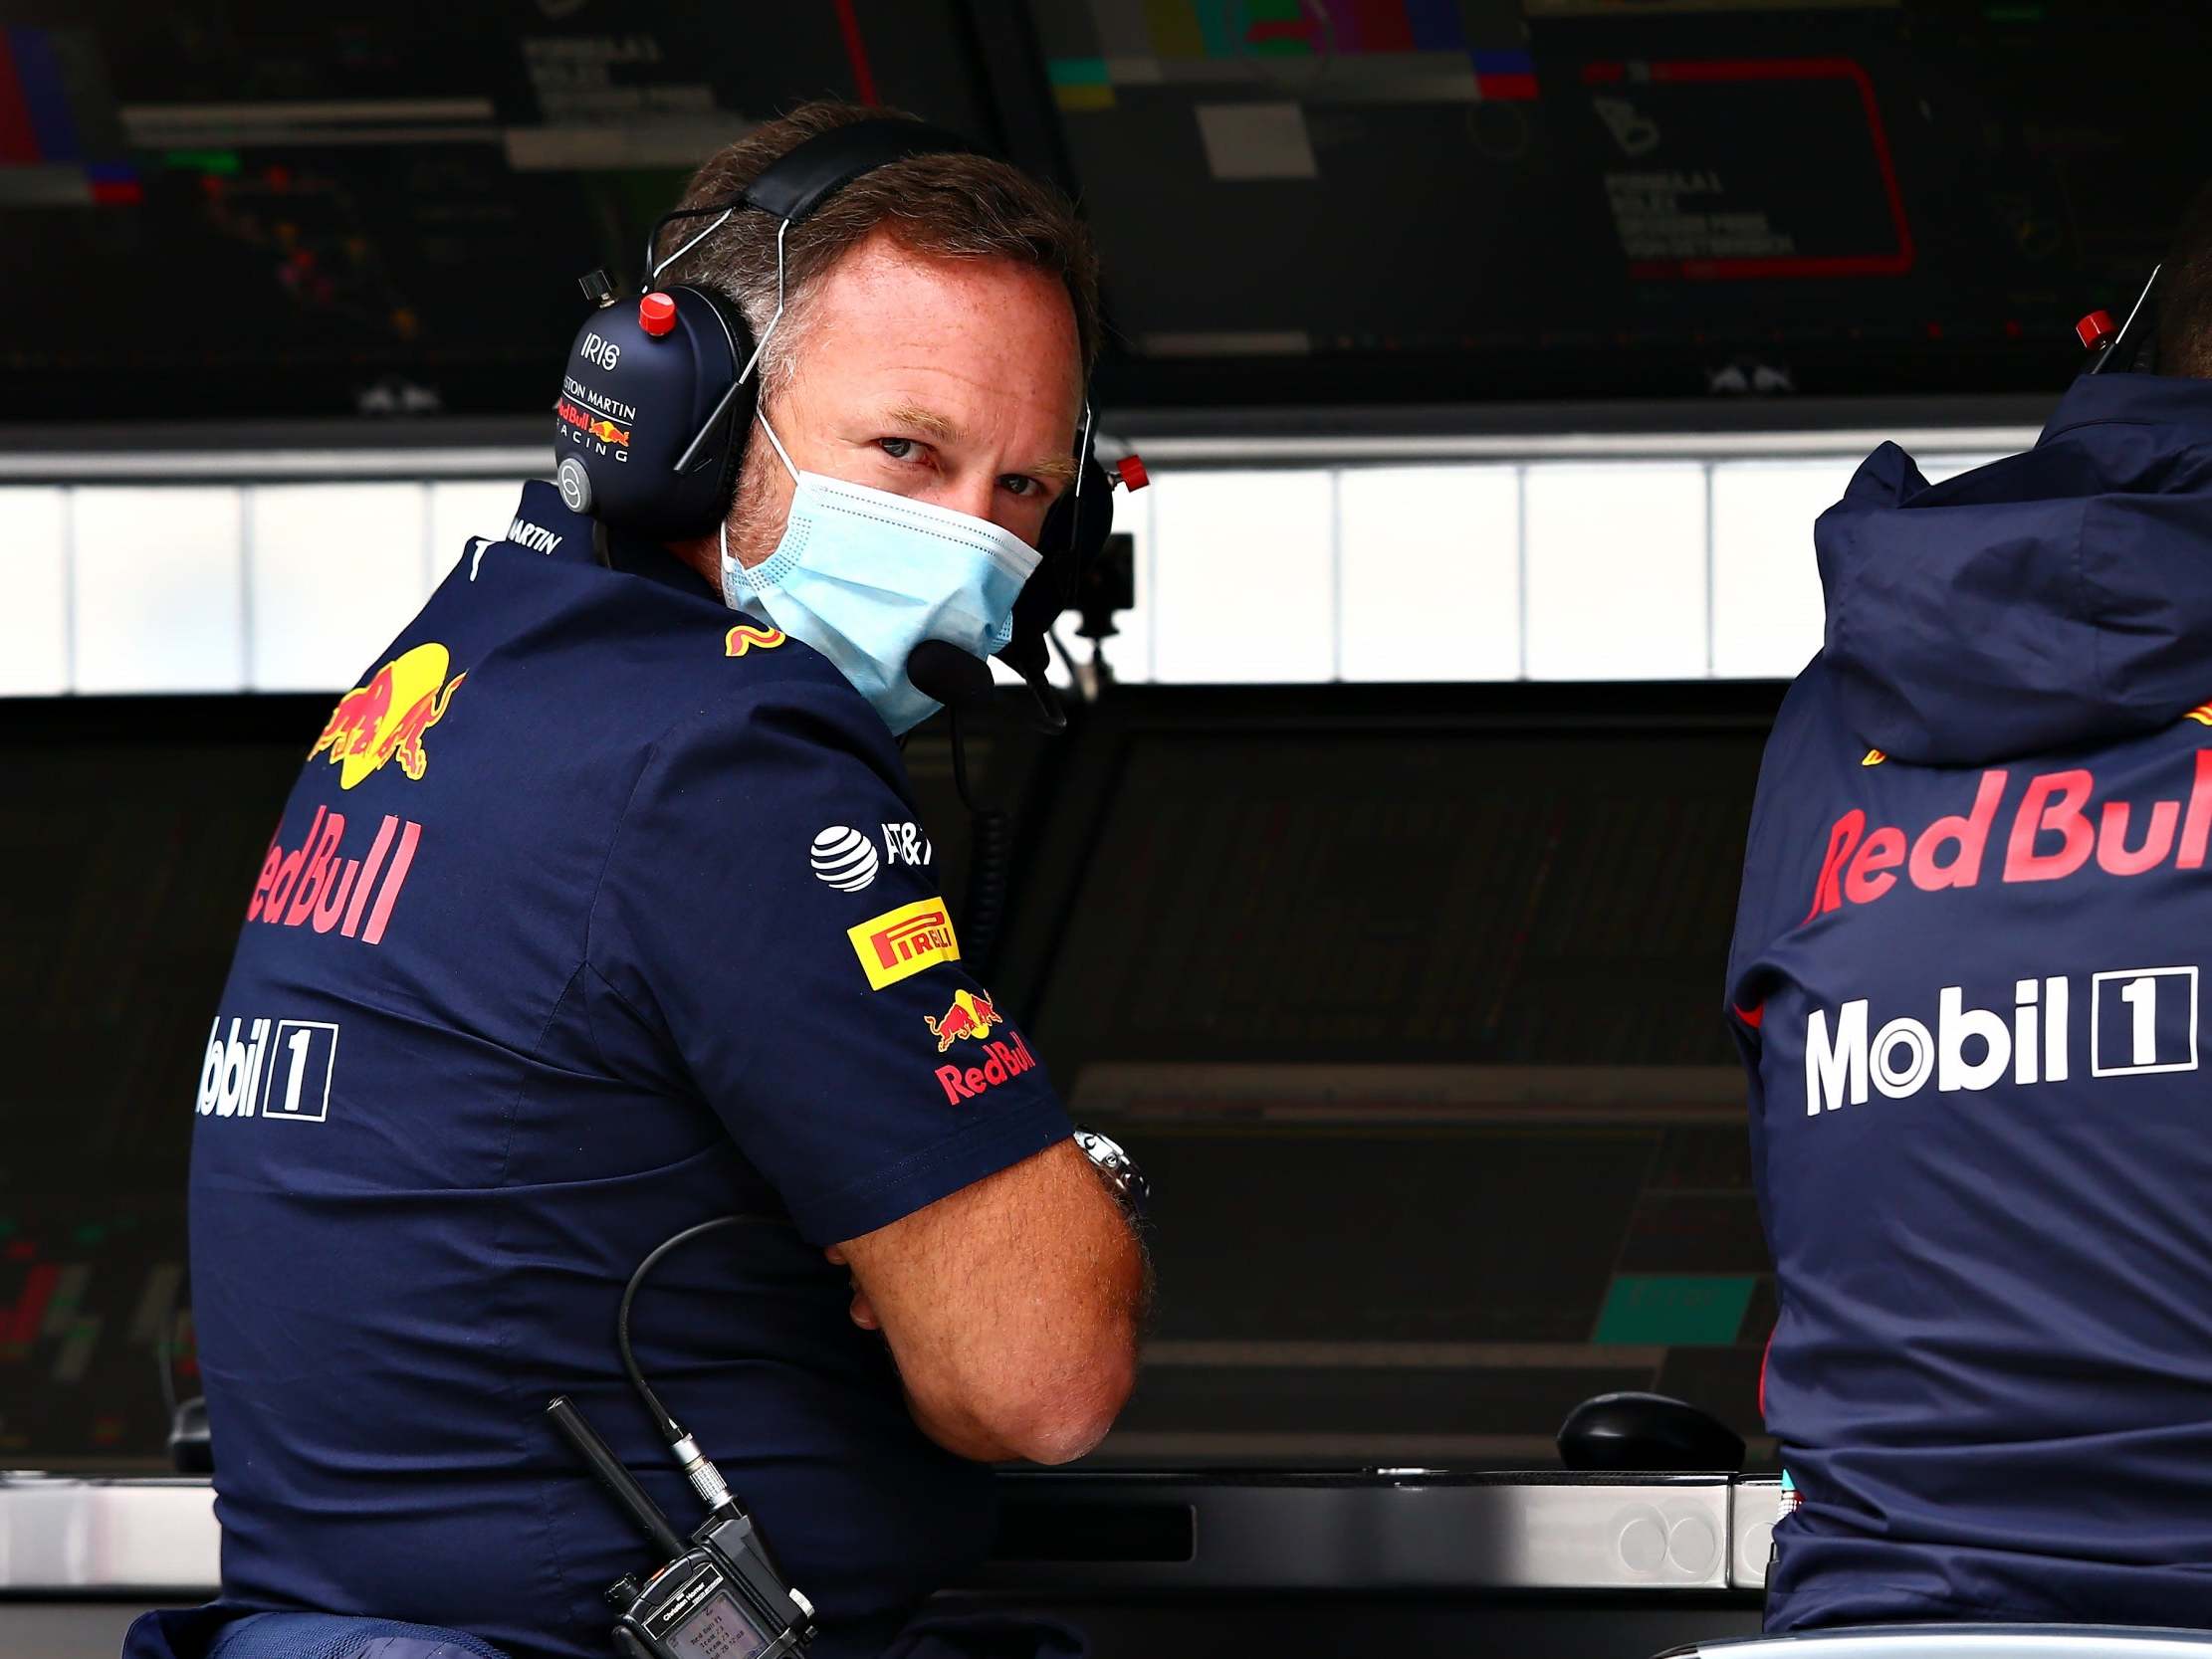 Red Bull protested Mercedes's use of the DAS system